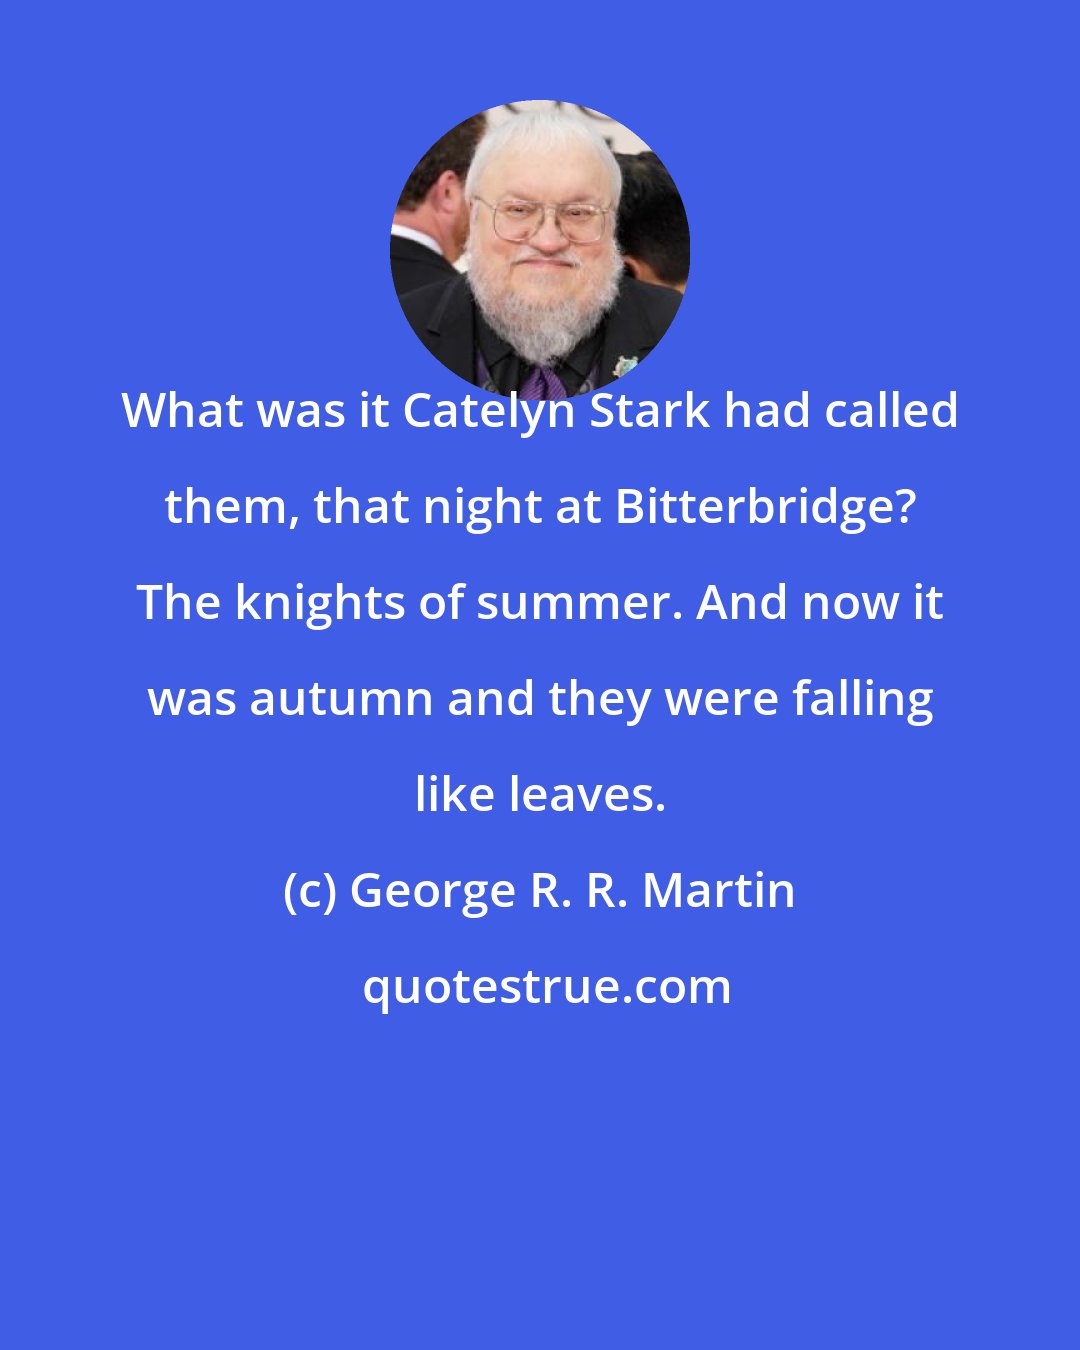 George R. R. Martin: What was it Catelyn Stark had called them, that night at Bitterbridge? The knights of summer. And now it was autumn and they were falling like leaves.